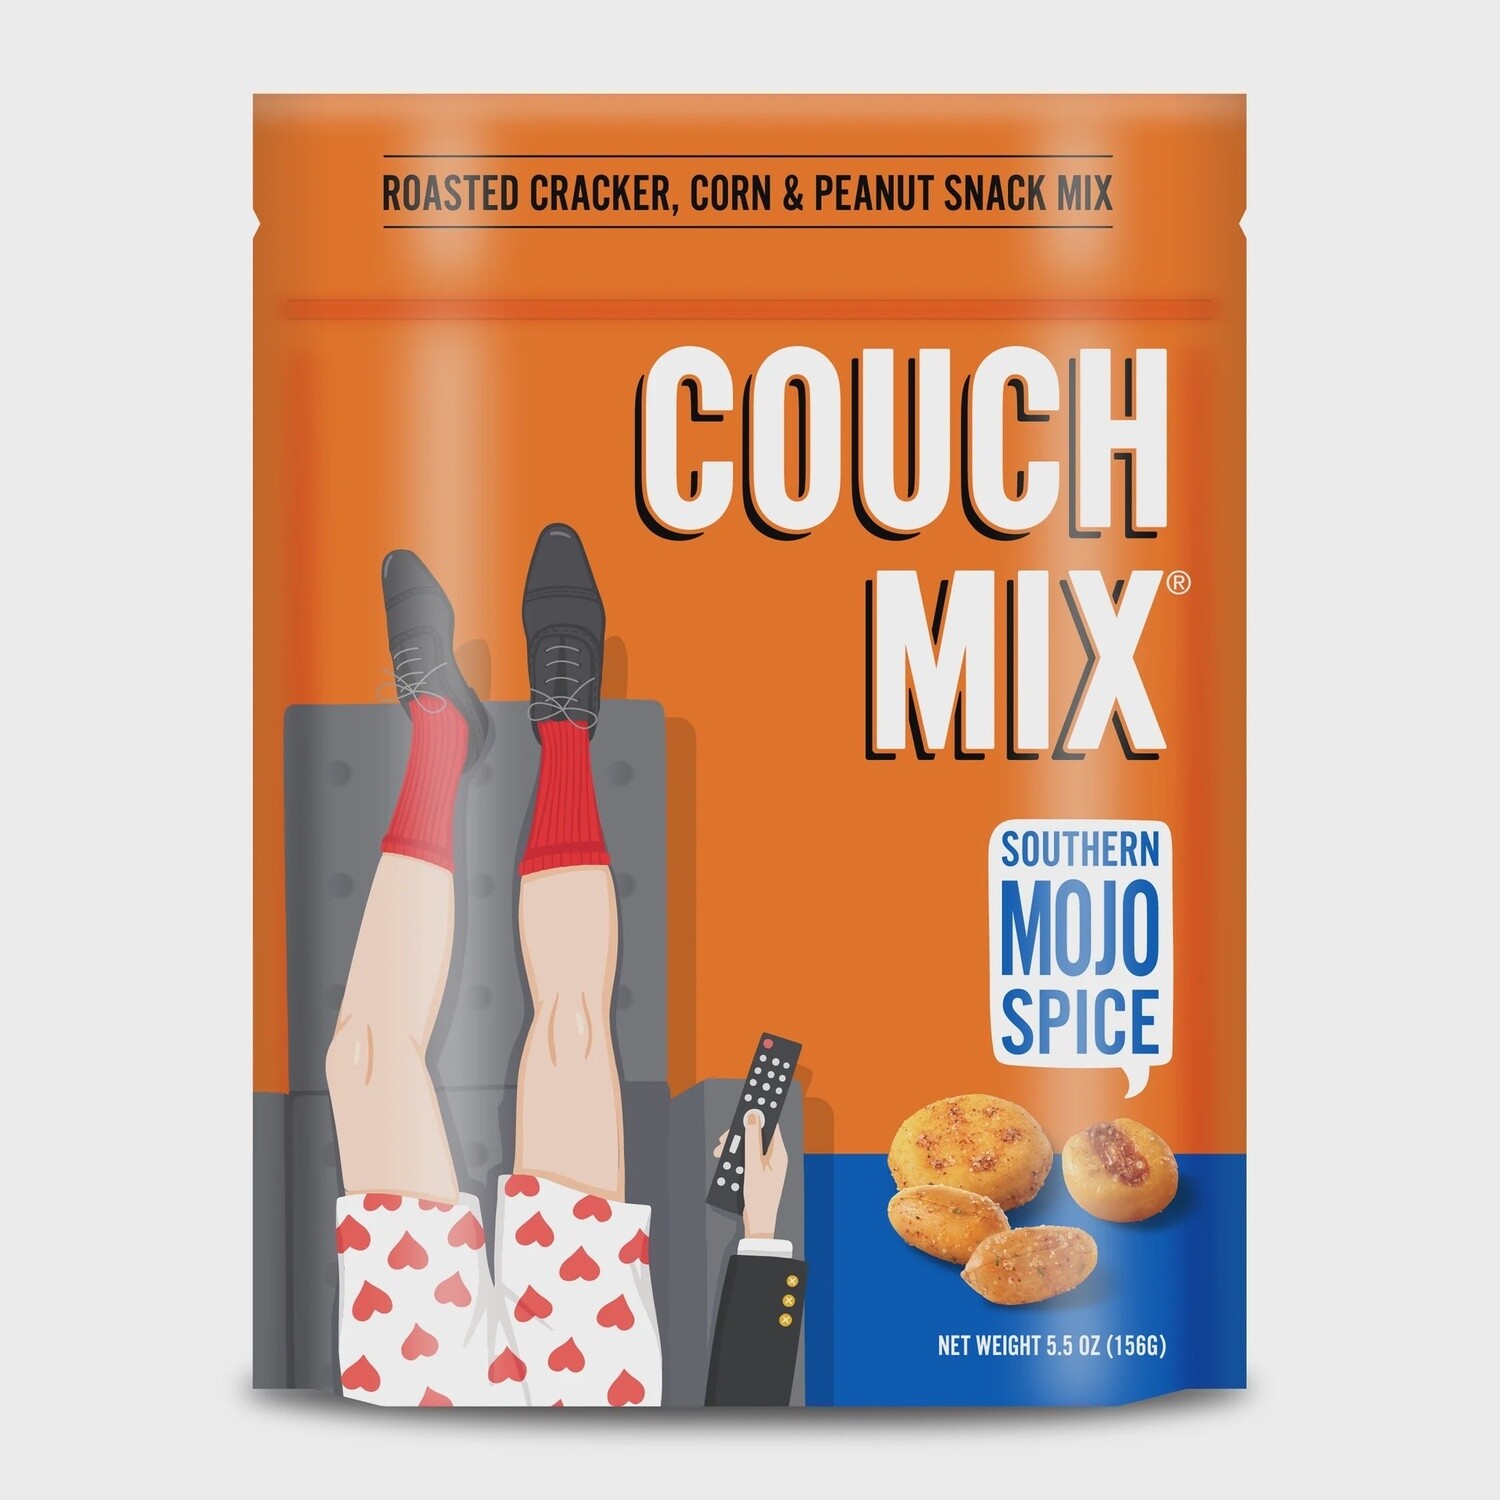 Couch Mix Southern Mojo Spice Peanut Snack Mix